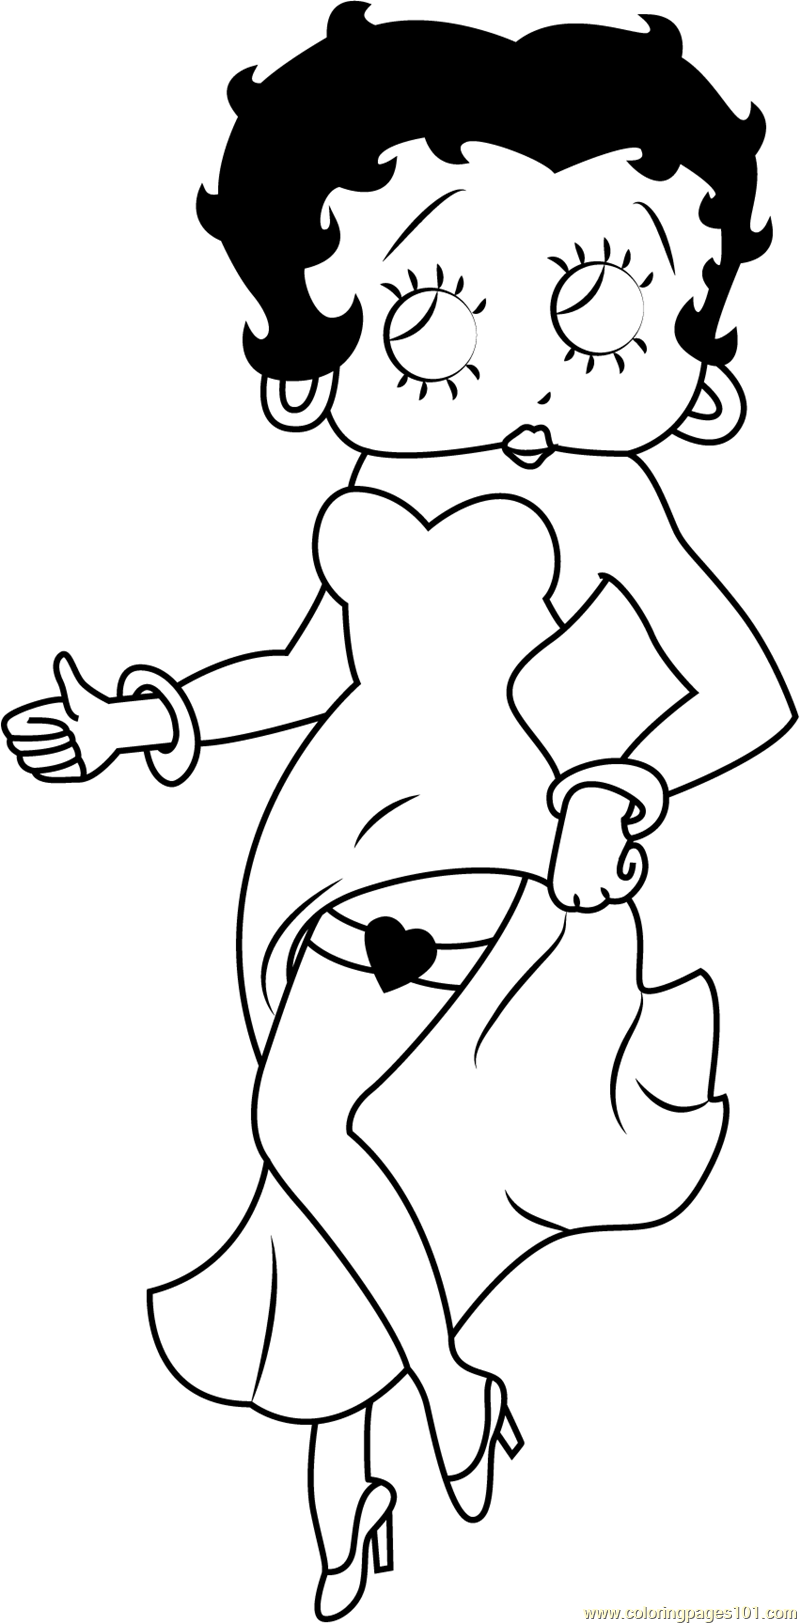 Betty Boop in Red Long Dress Coloring Page for Kids - Free Betty Boop ...